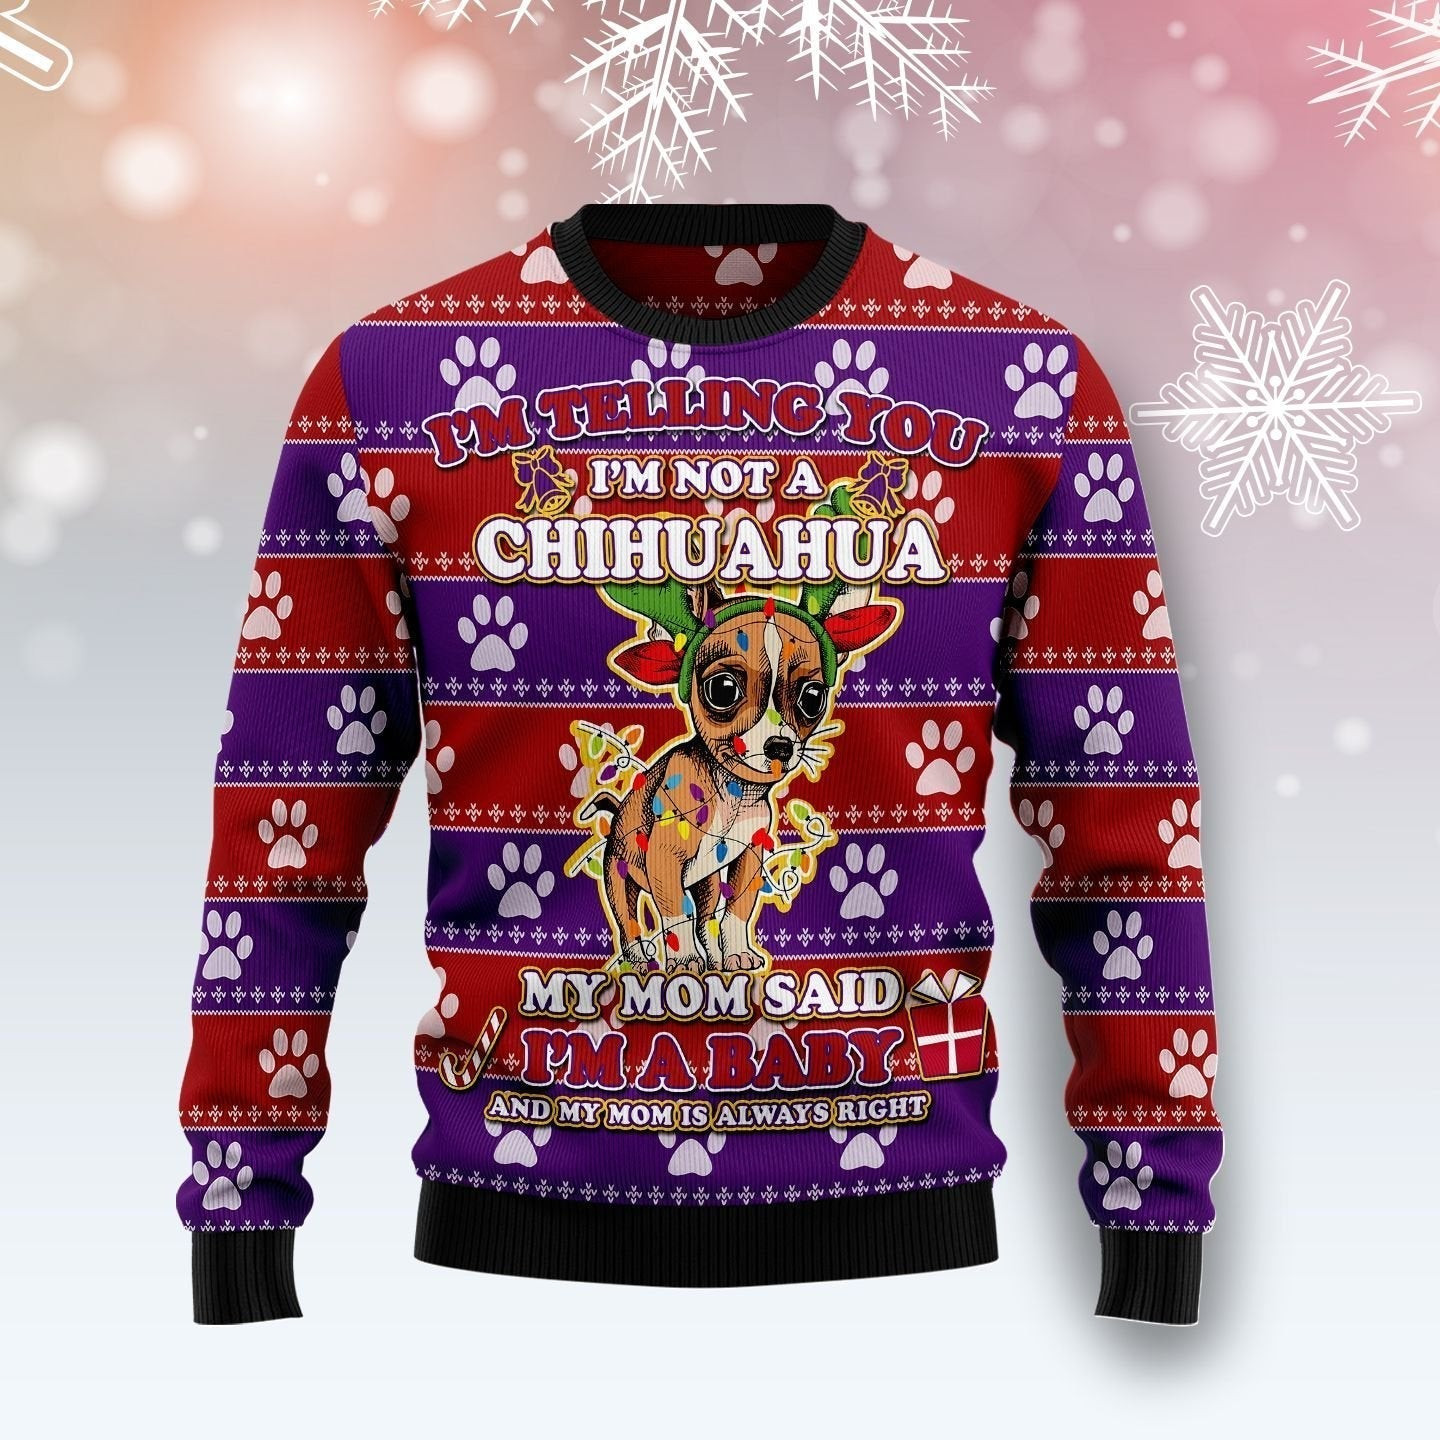 Chihuahua Baby Christmas Ugly Christmas Sweater Ugly Sweater For Men Women, Holiday Sweater